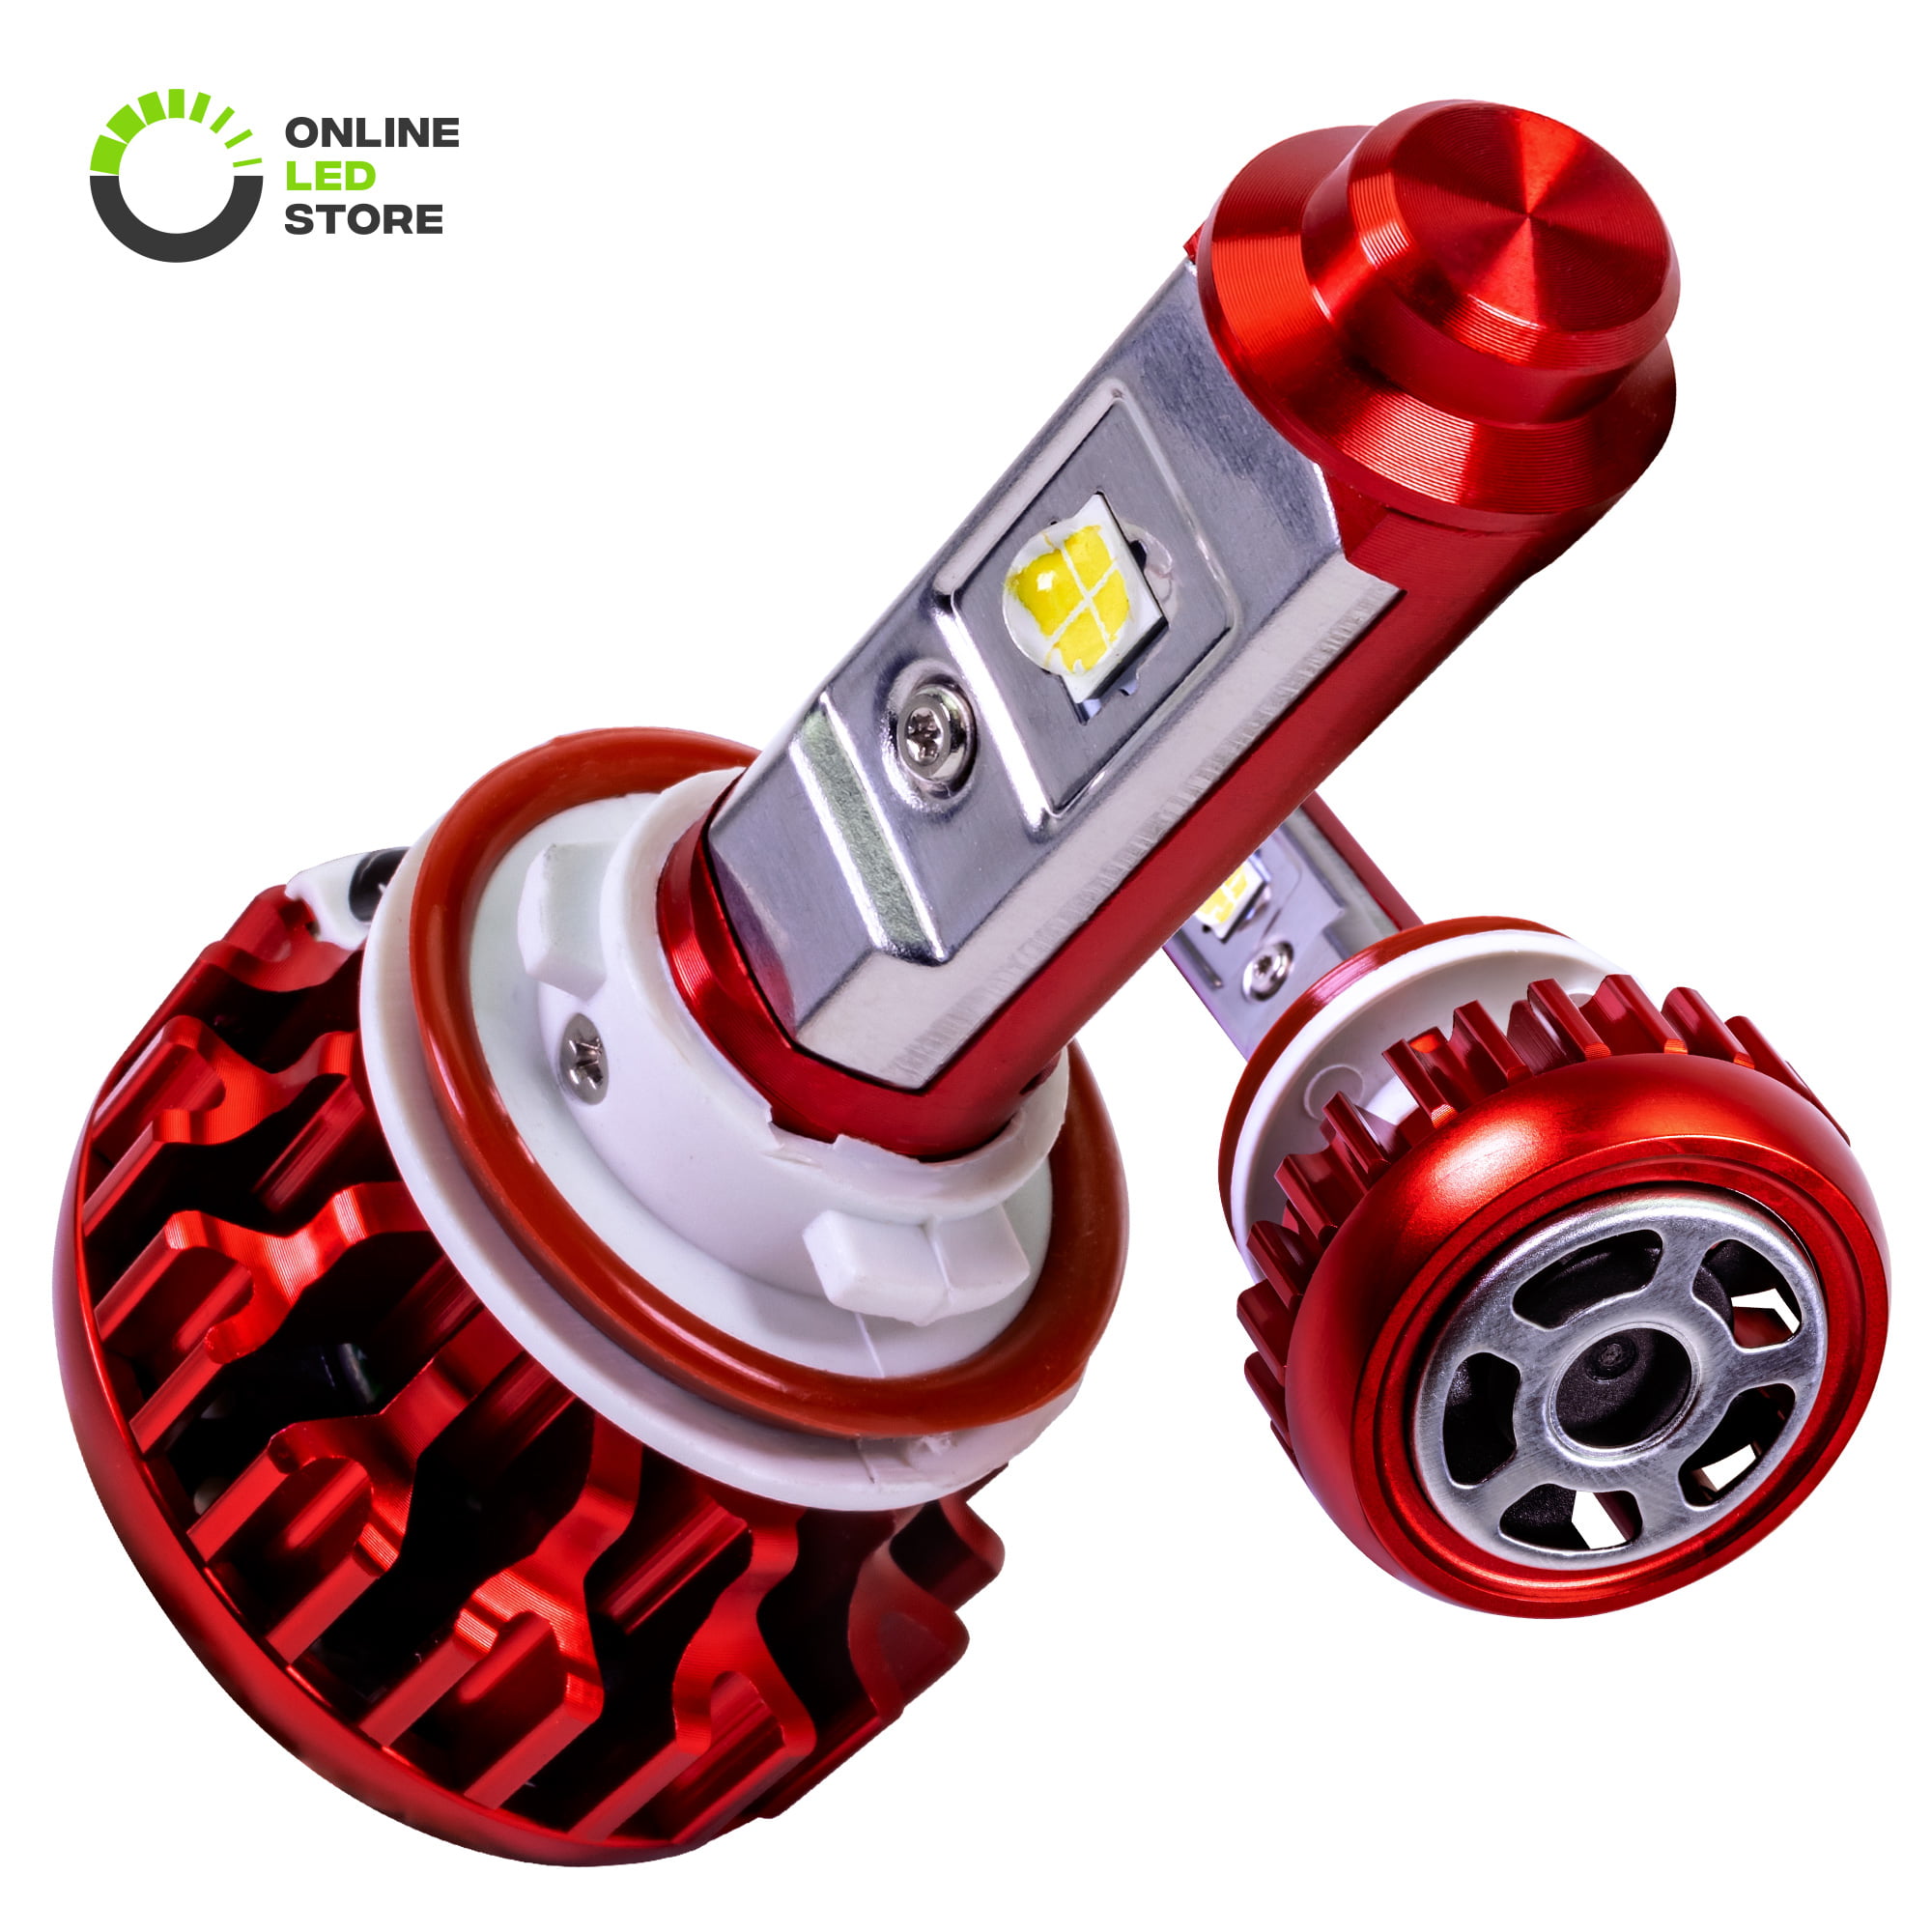 Details about   H9 LED Headlight High Beam Kit Plug&Play Turbo Cool Fan Waterproof CREE Chip 